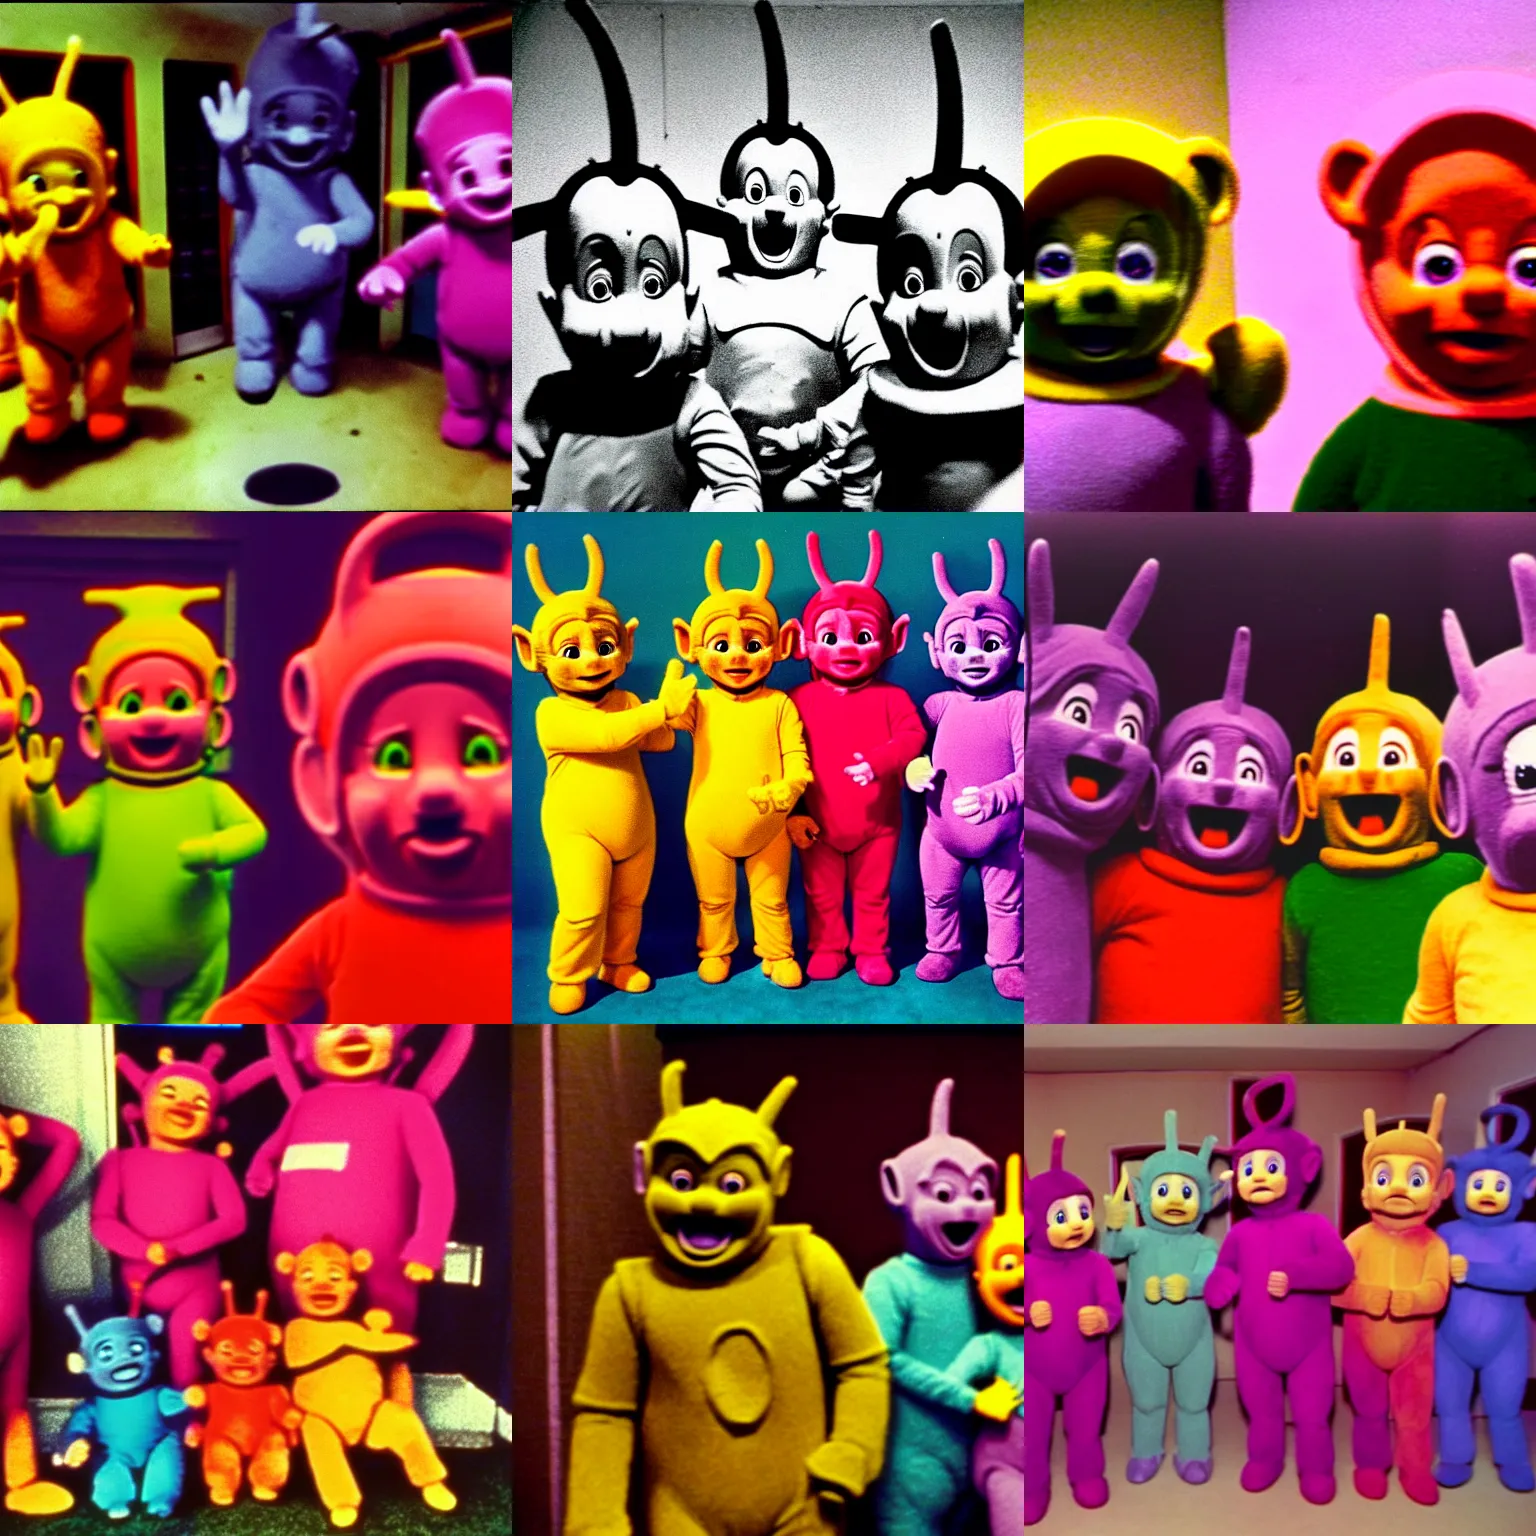 Prompt: 1 9 9 0 teletubbies in the backrooms, animatronics, disturbing, vhs filter, found footage